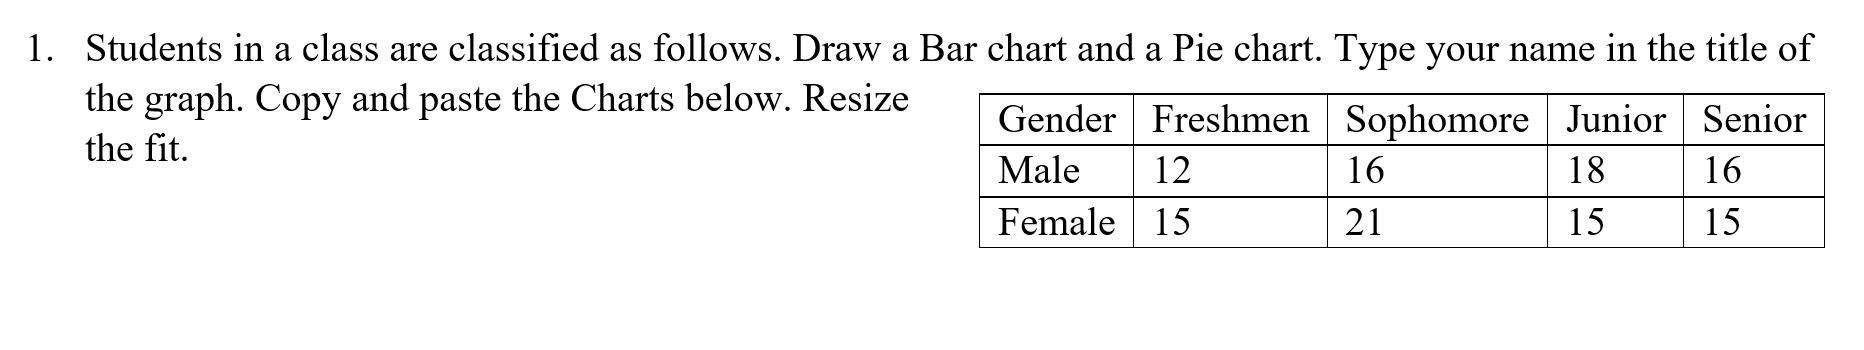 1. Students in a class are classified as follows. Draw a Bar chart and a Pie chart. Type your name in the title of
the graph. Copy and paste the Charts below. Resize
the fit.
Gender Freshmen Sophomore Junior Senior
Male
12
16
18
16
Female 15
21
15
15
